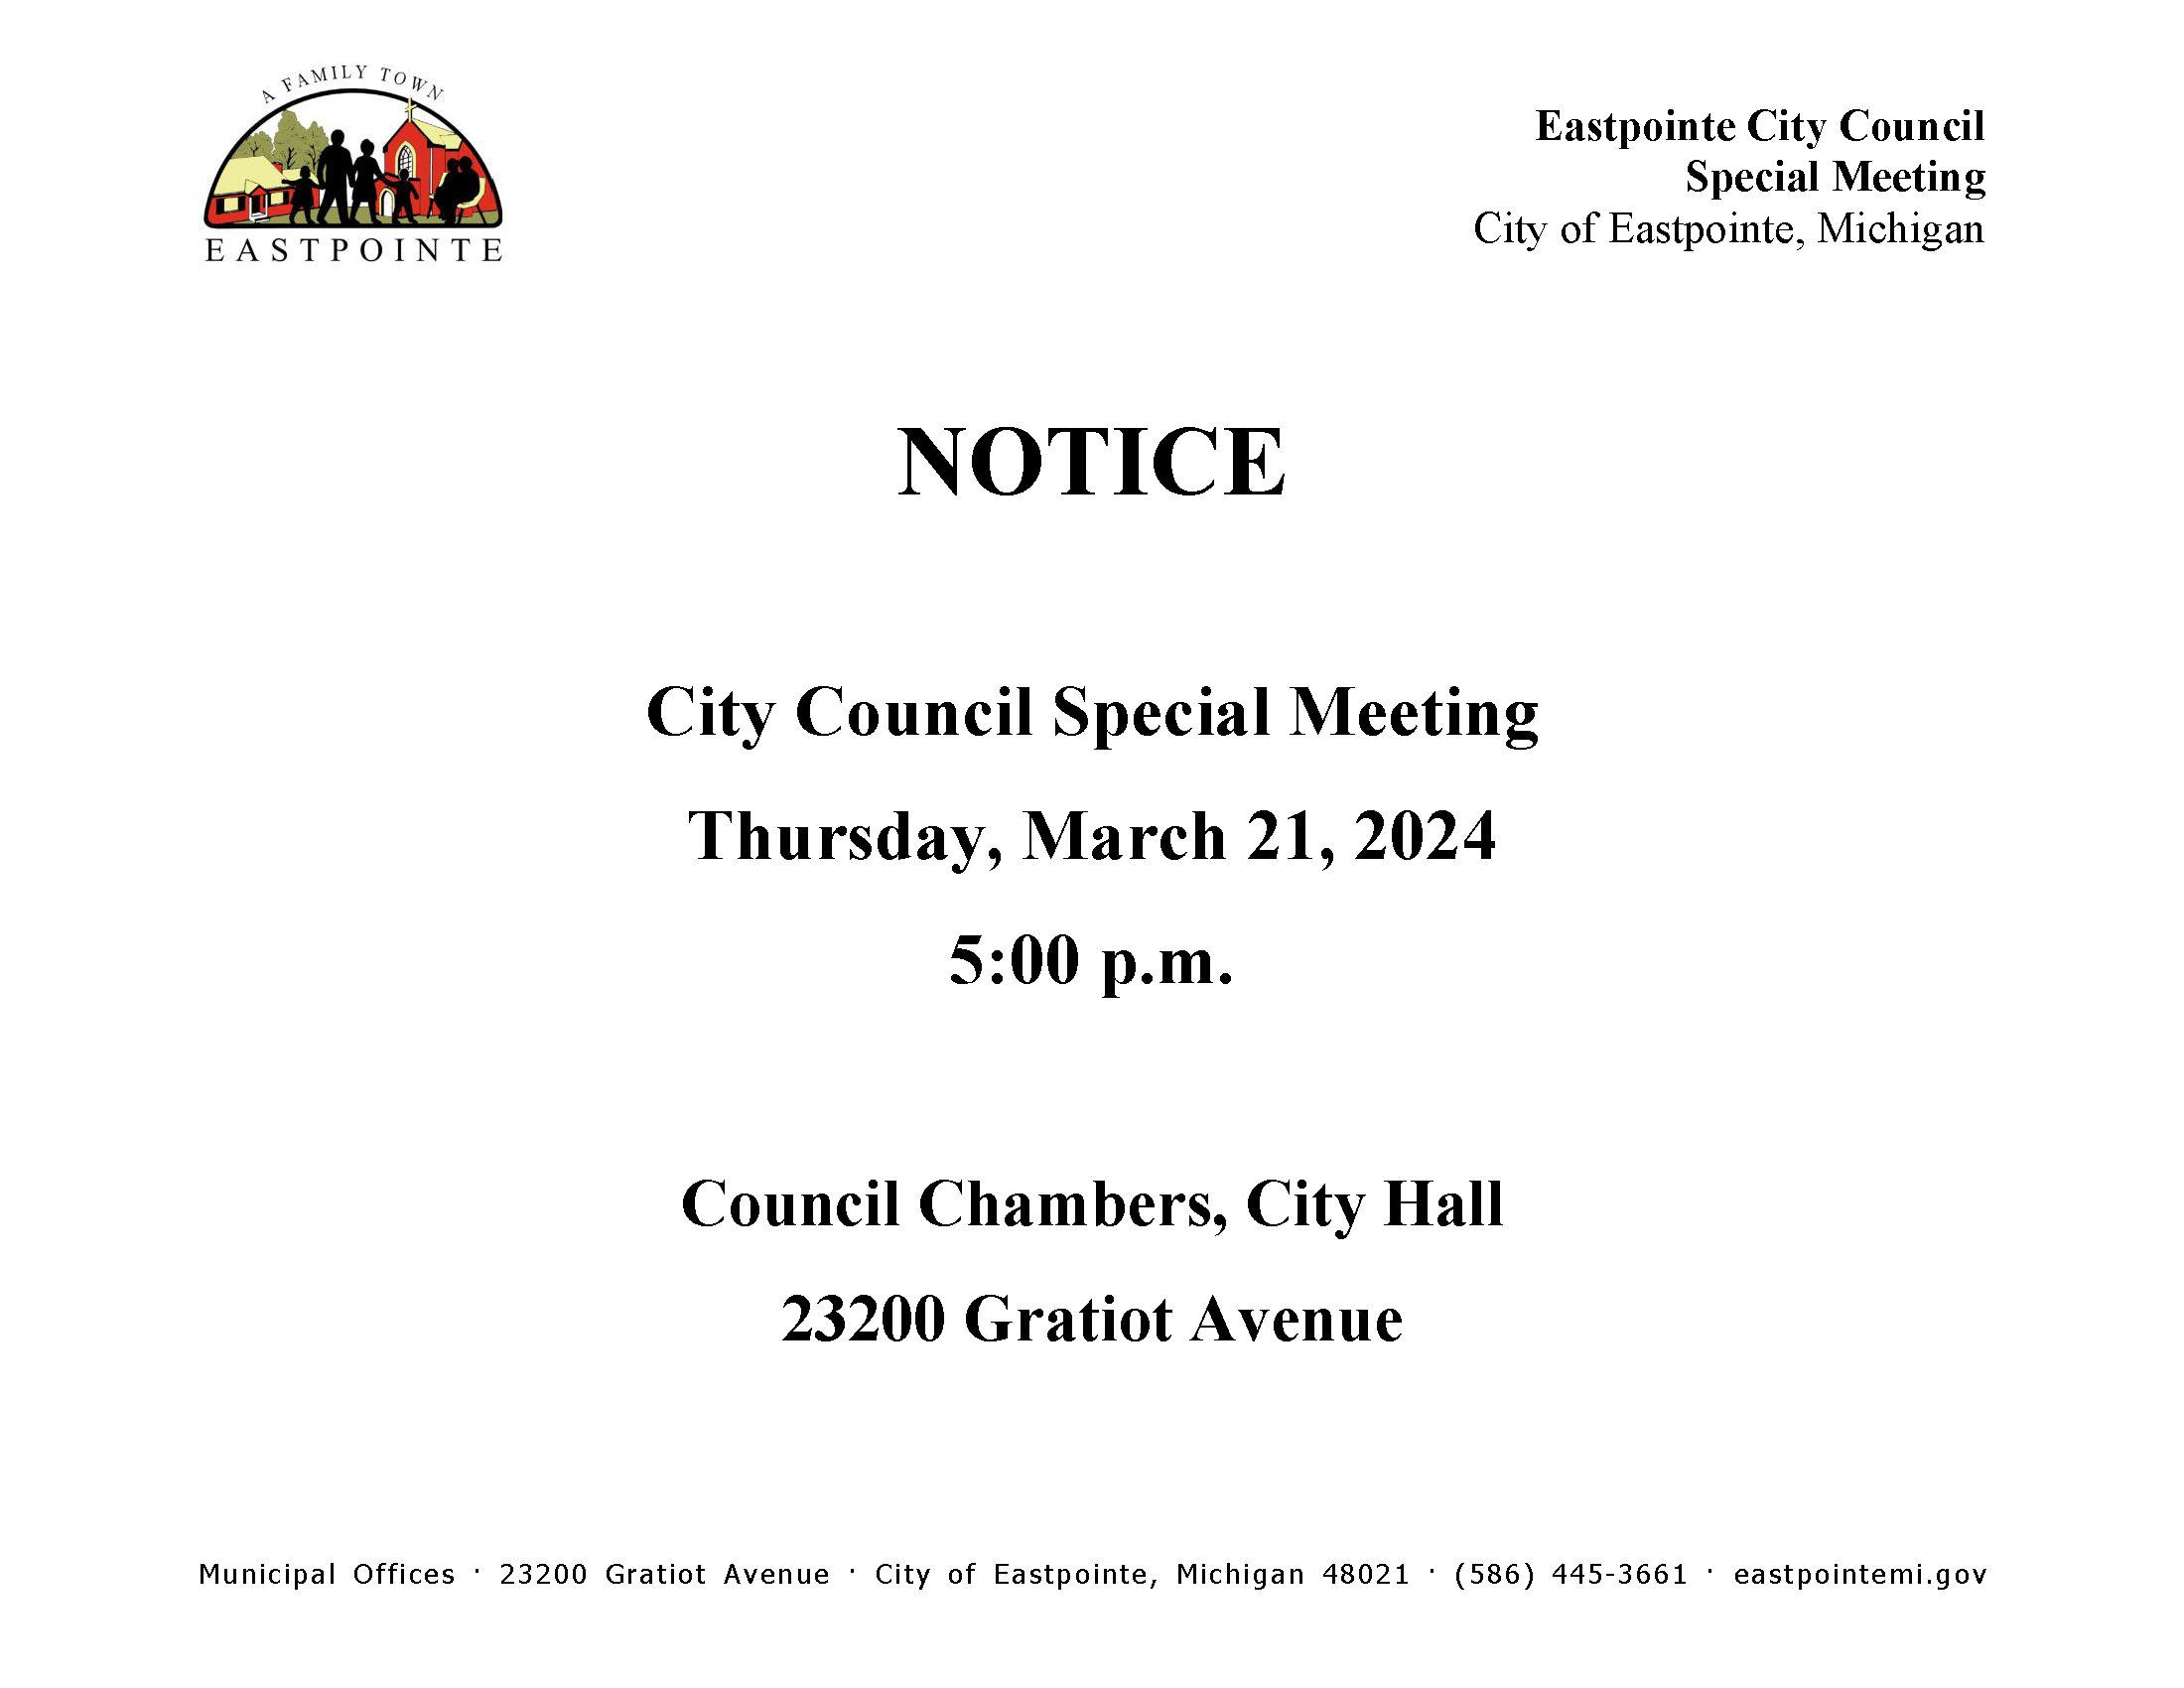 Notice to Post City Council Special Meeting